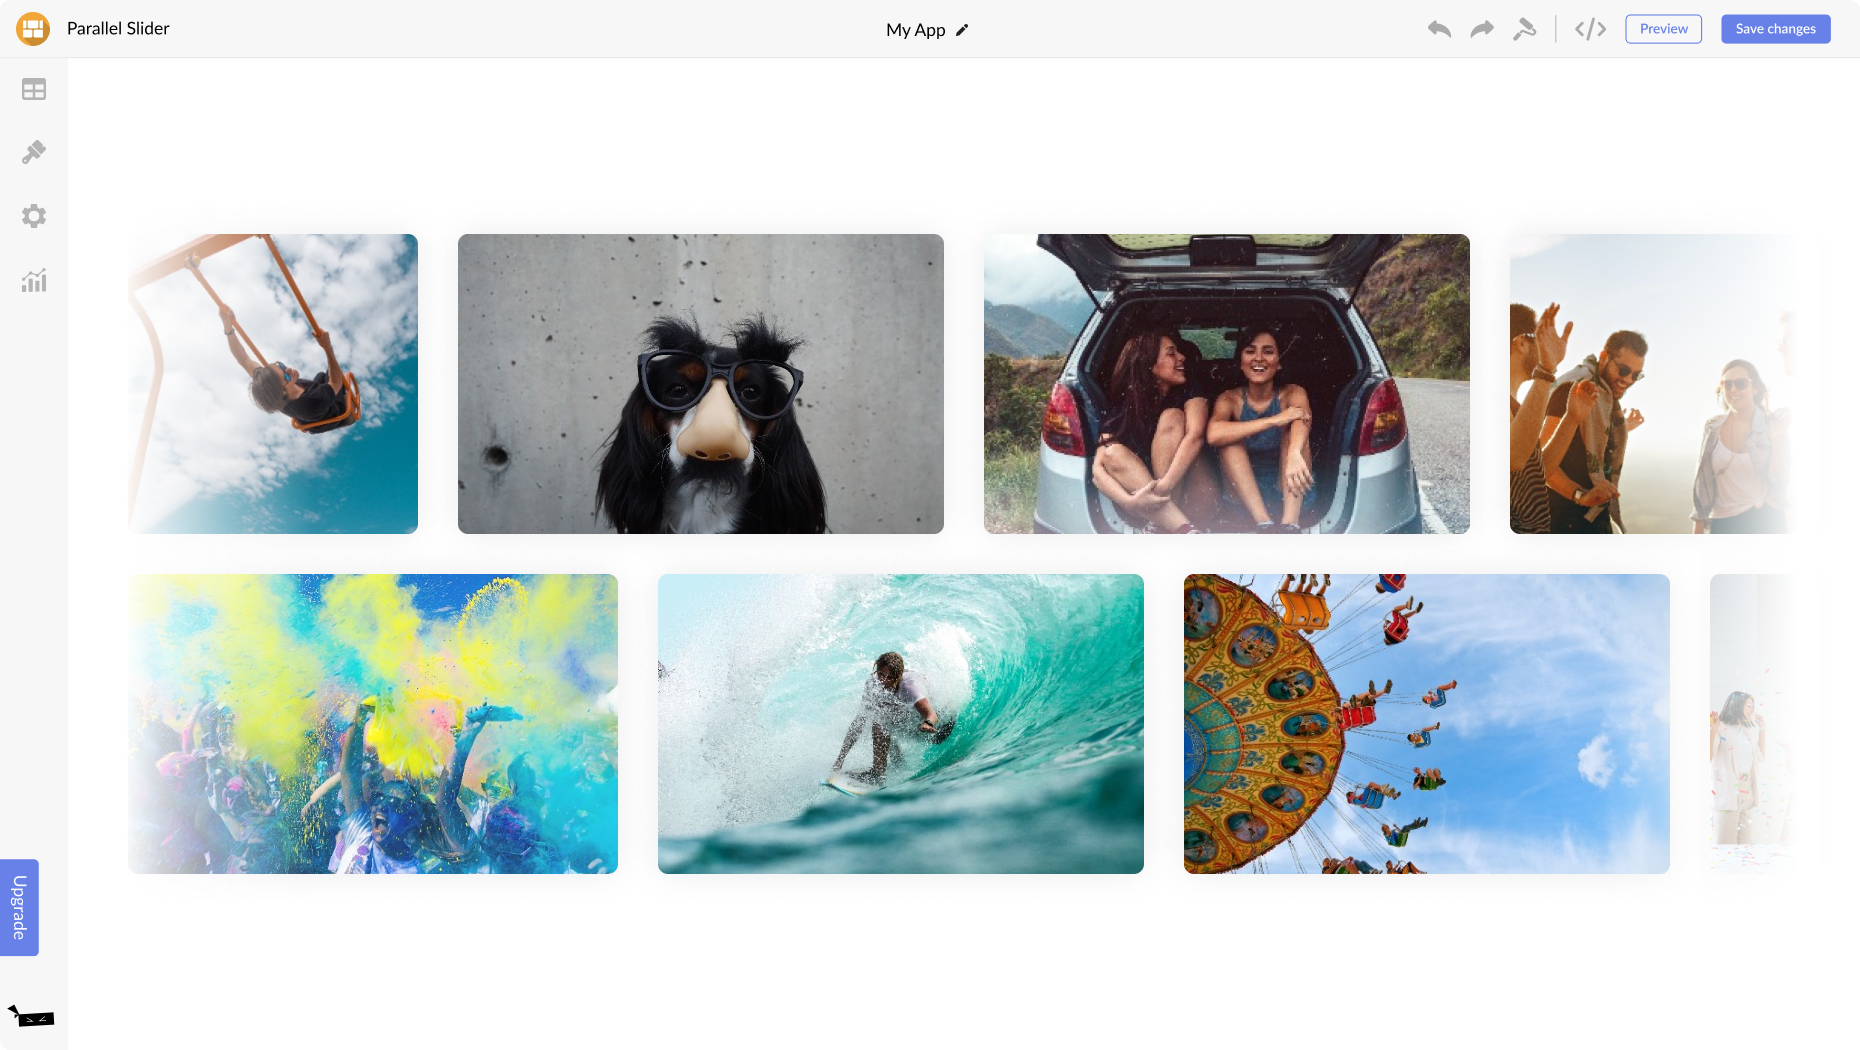 Multi-Row Image Slider for Weebly